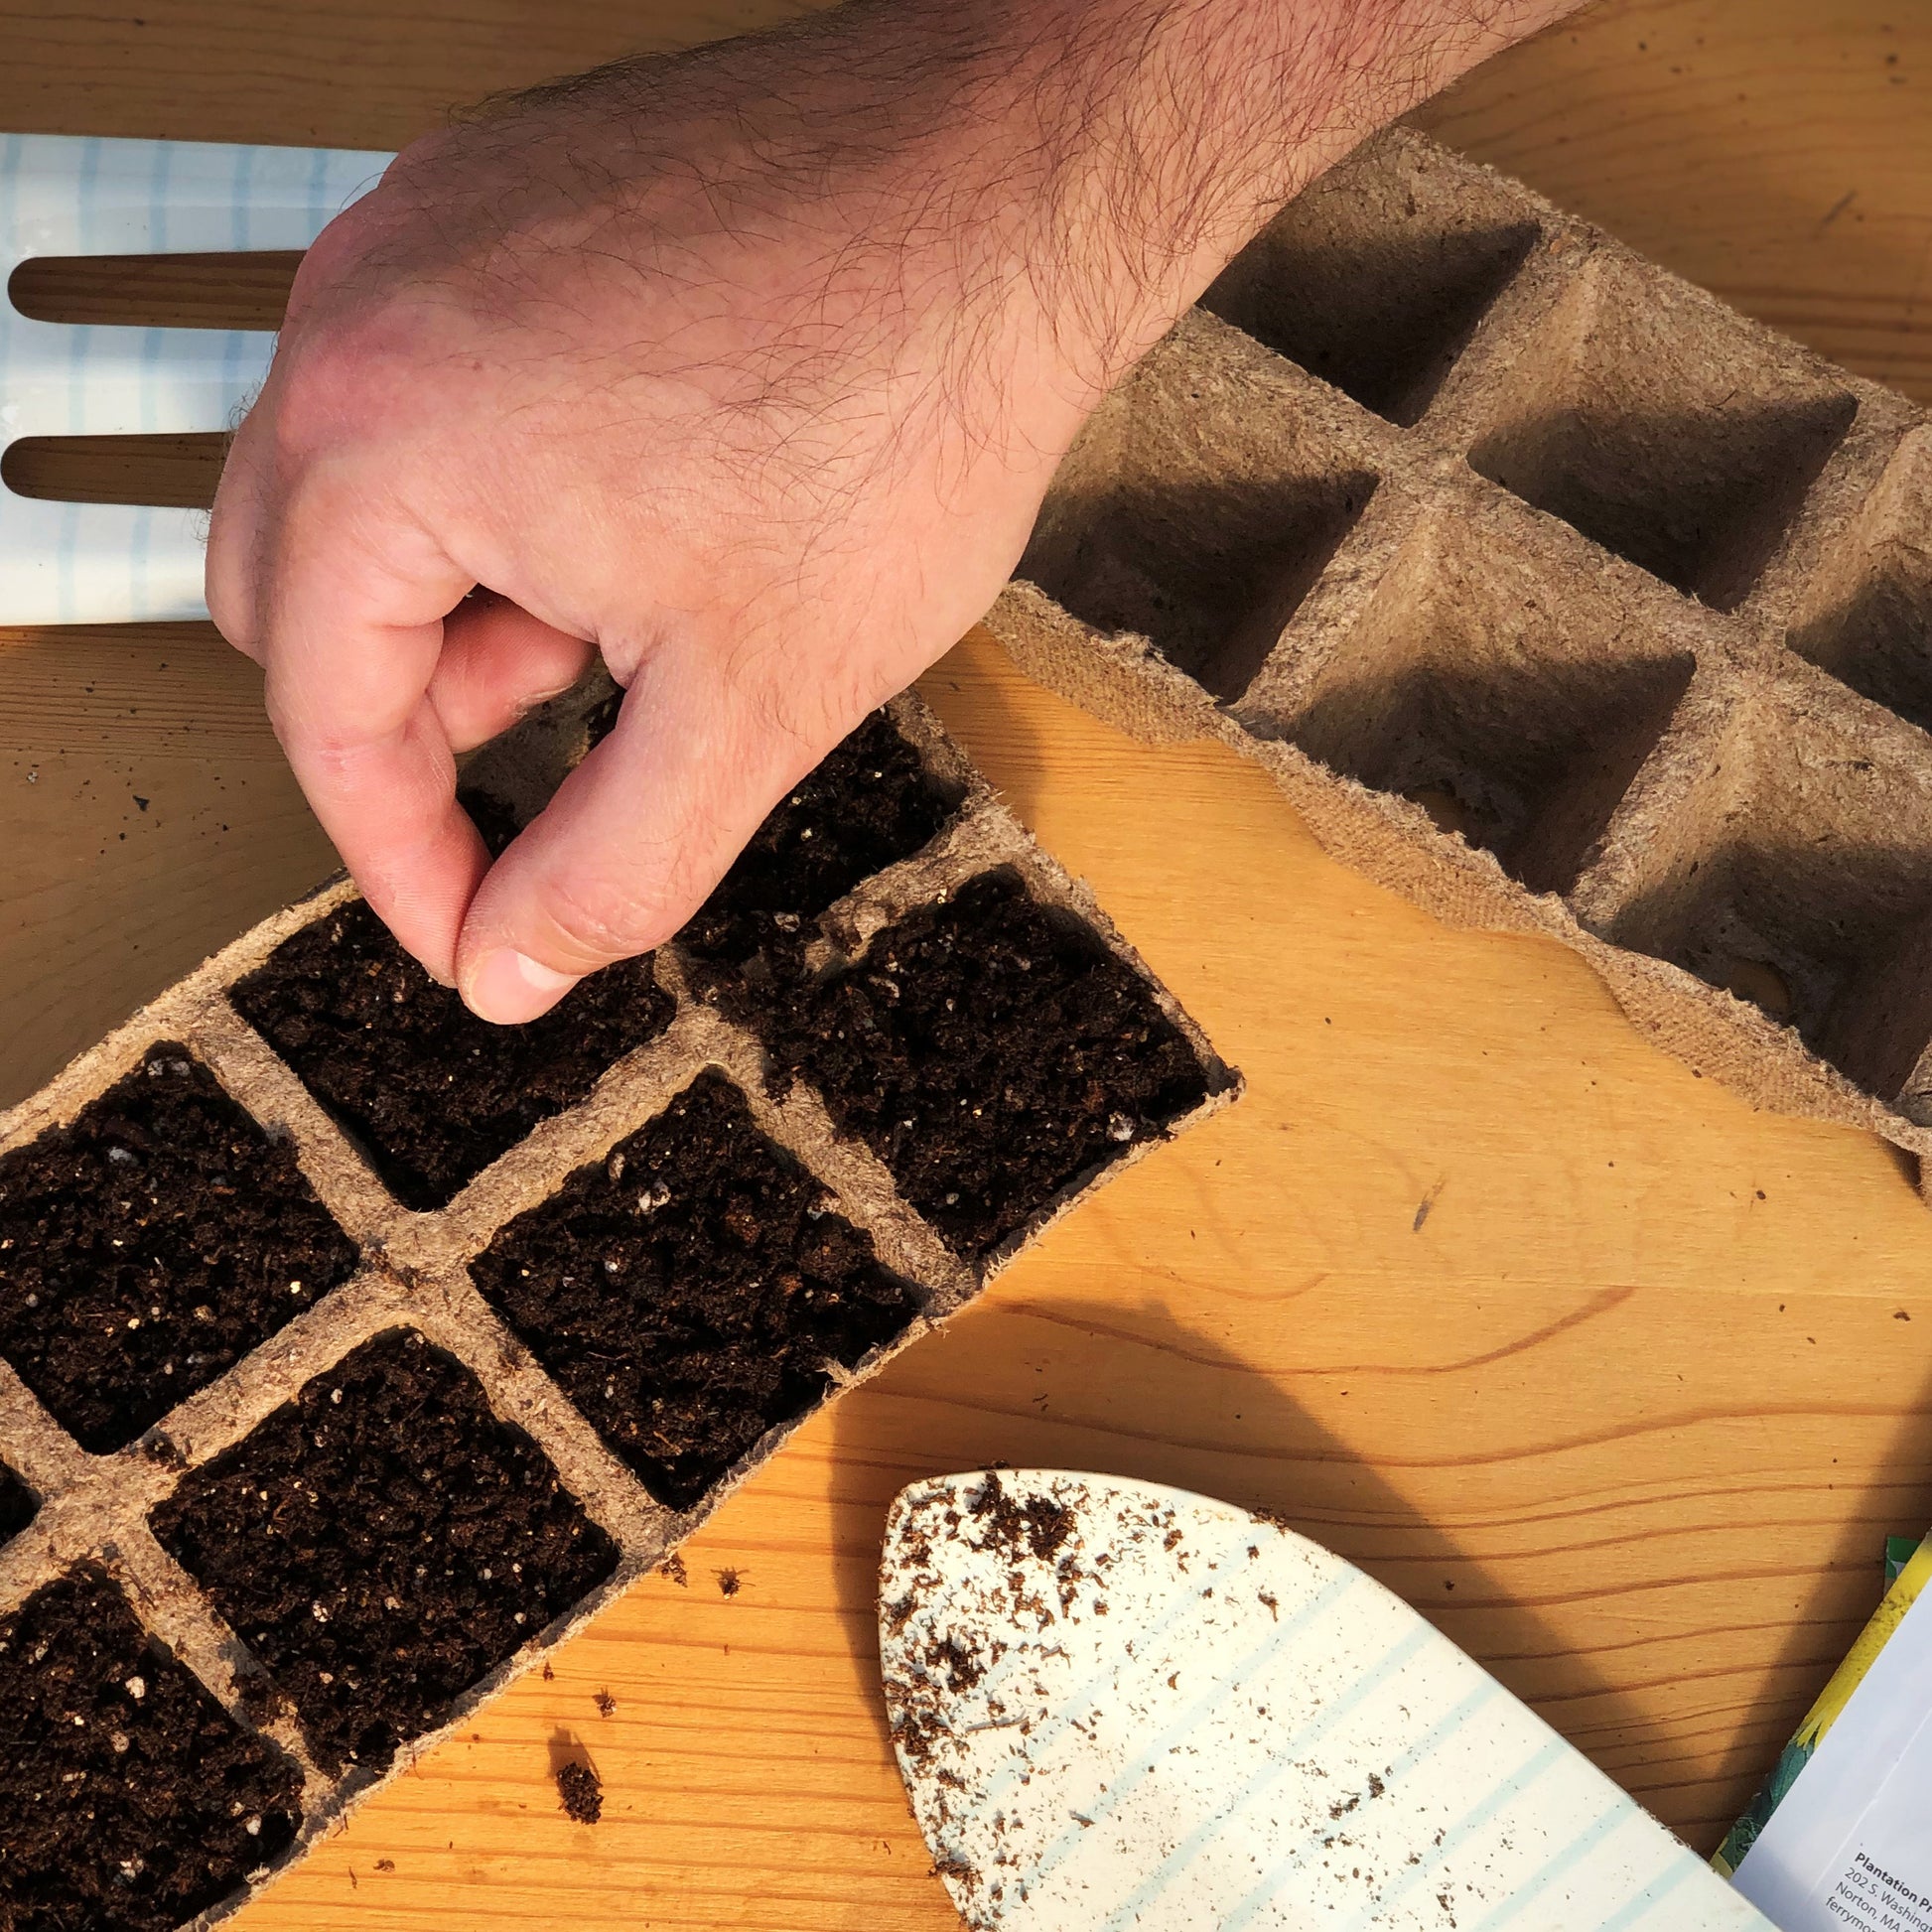 Start your Organic Early Prolific Straightneck Squash seeds in Jiffy biodegradable peat strip trays filled with seed starting mix and easily transplant when they're ready.